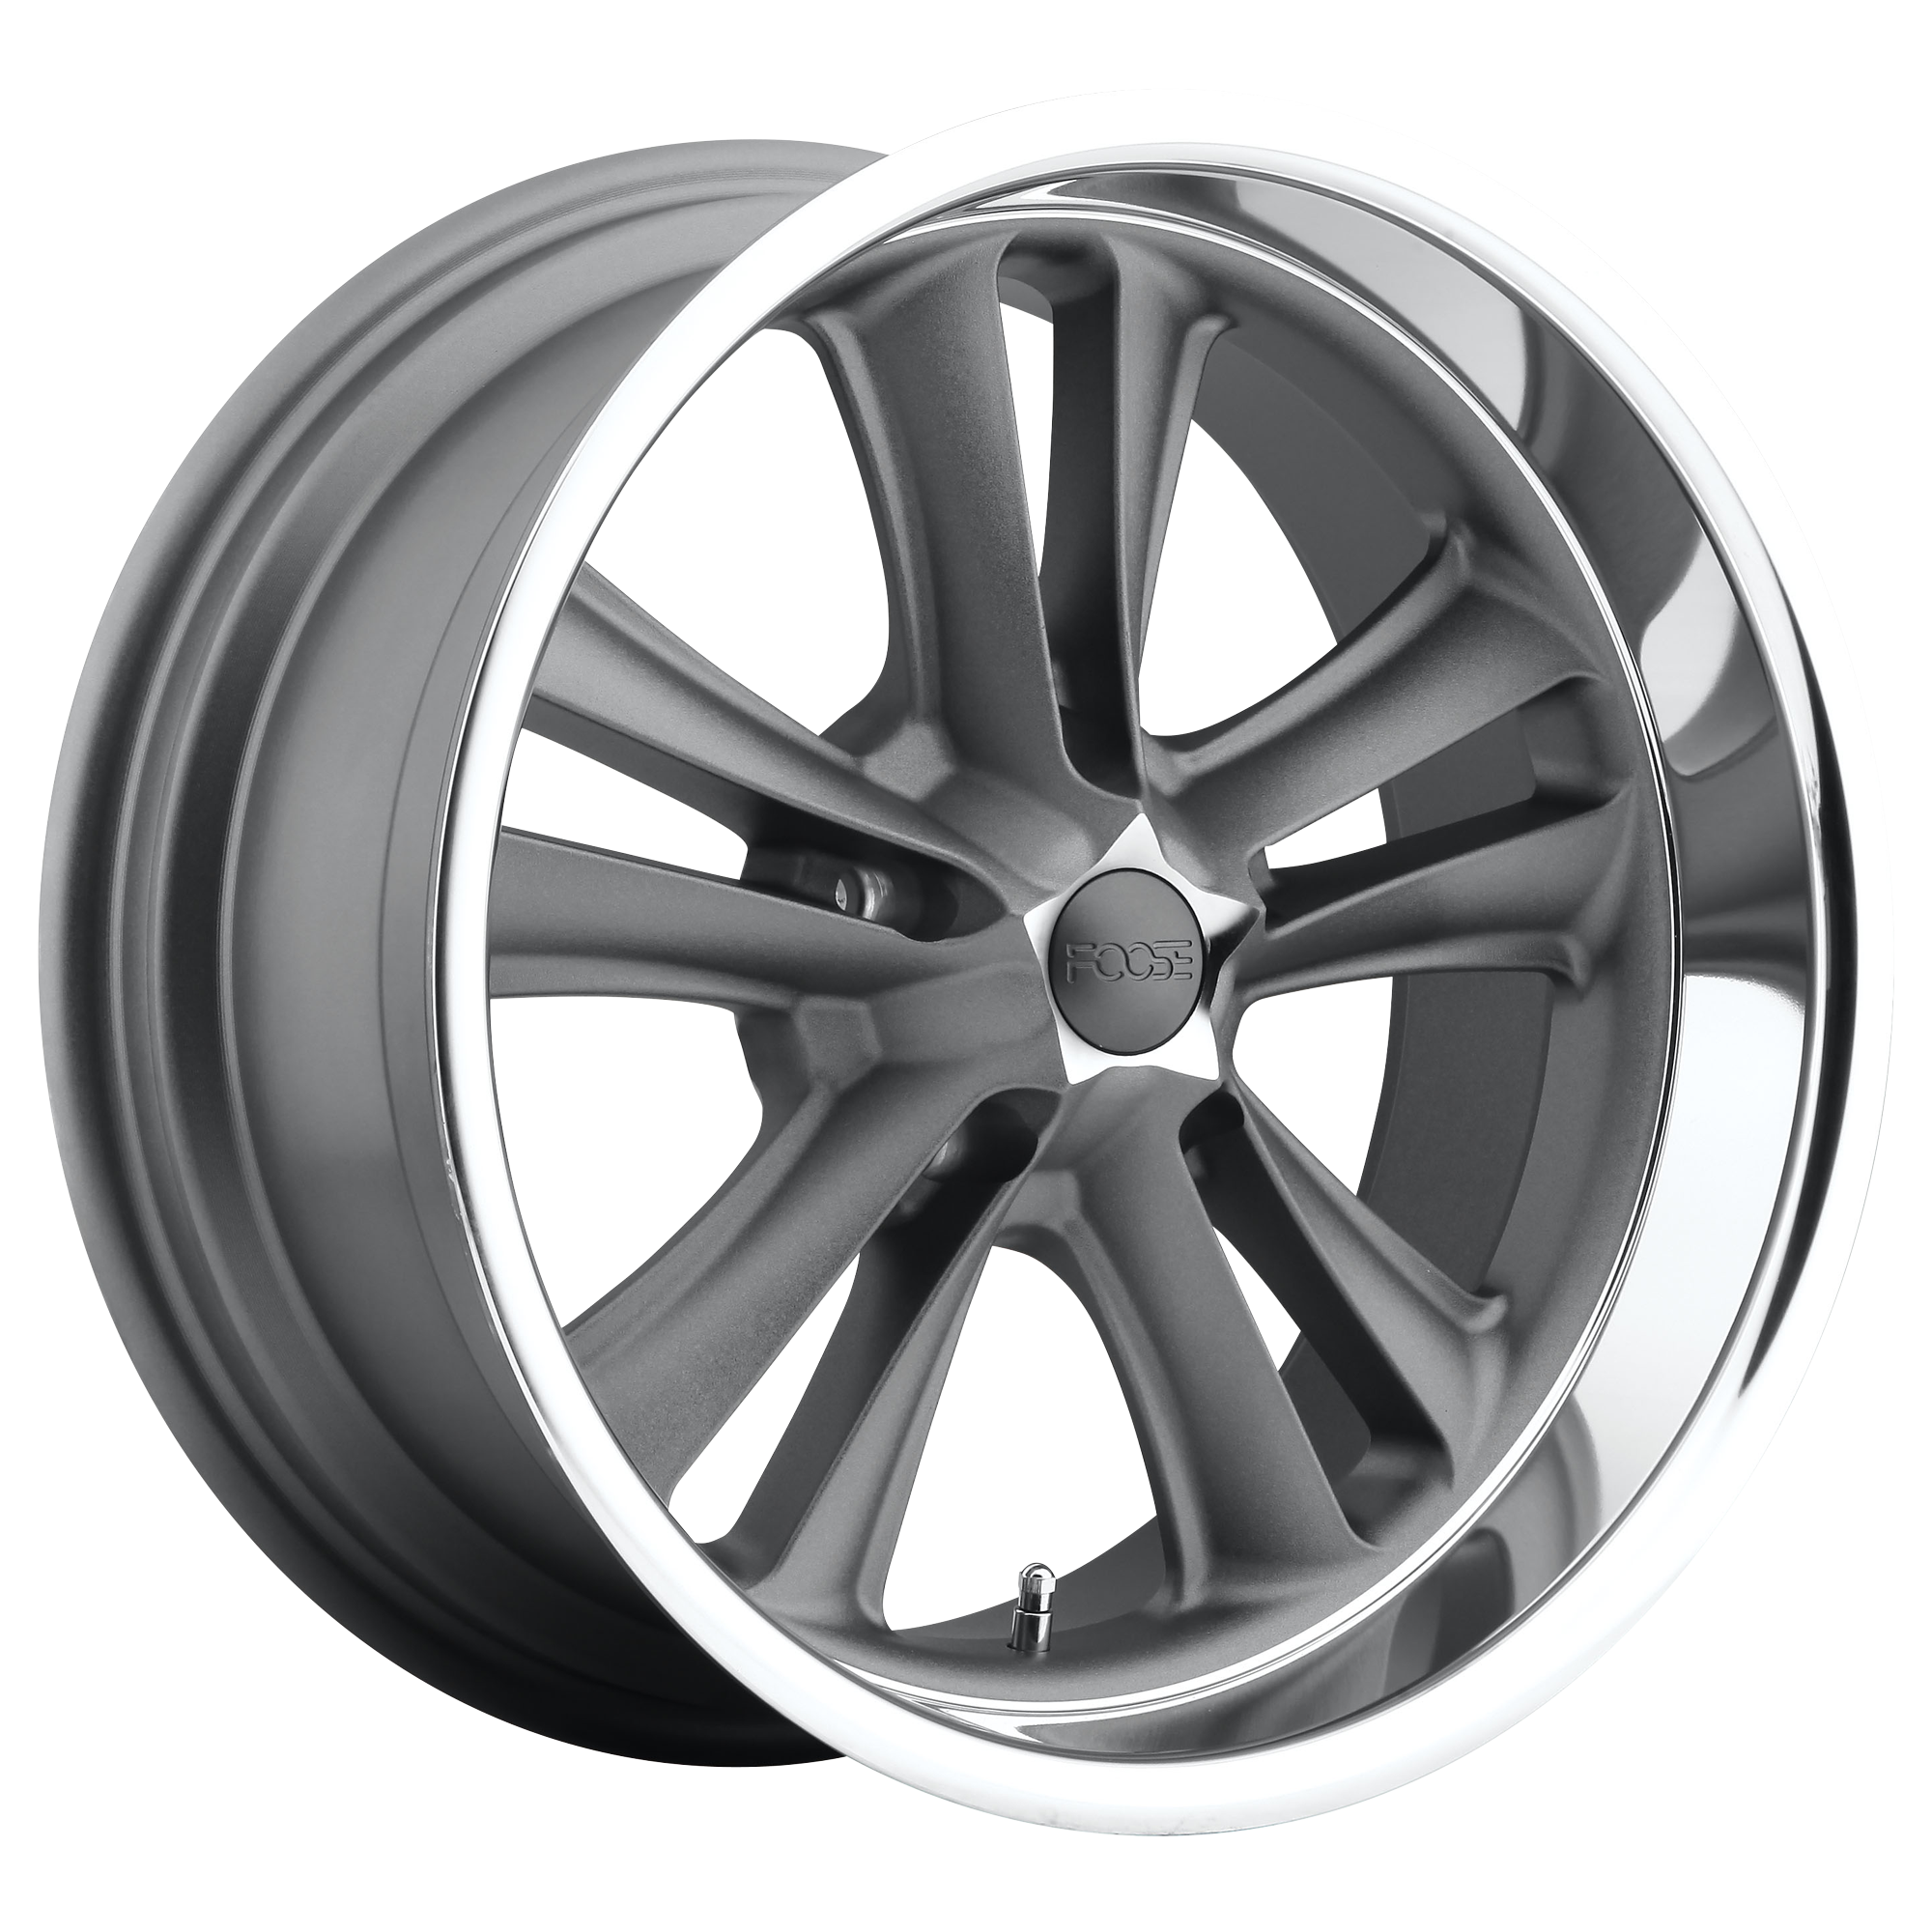 KNUCKLE 17x8 5x114.30 MATTE GUN METAL MACHINED (1 mm) - Tires and Engine Performance